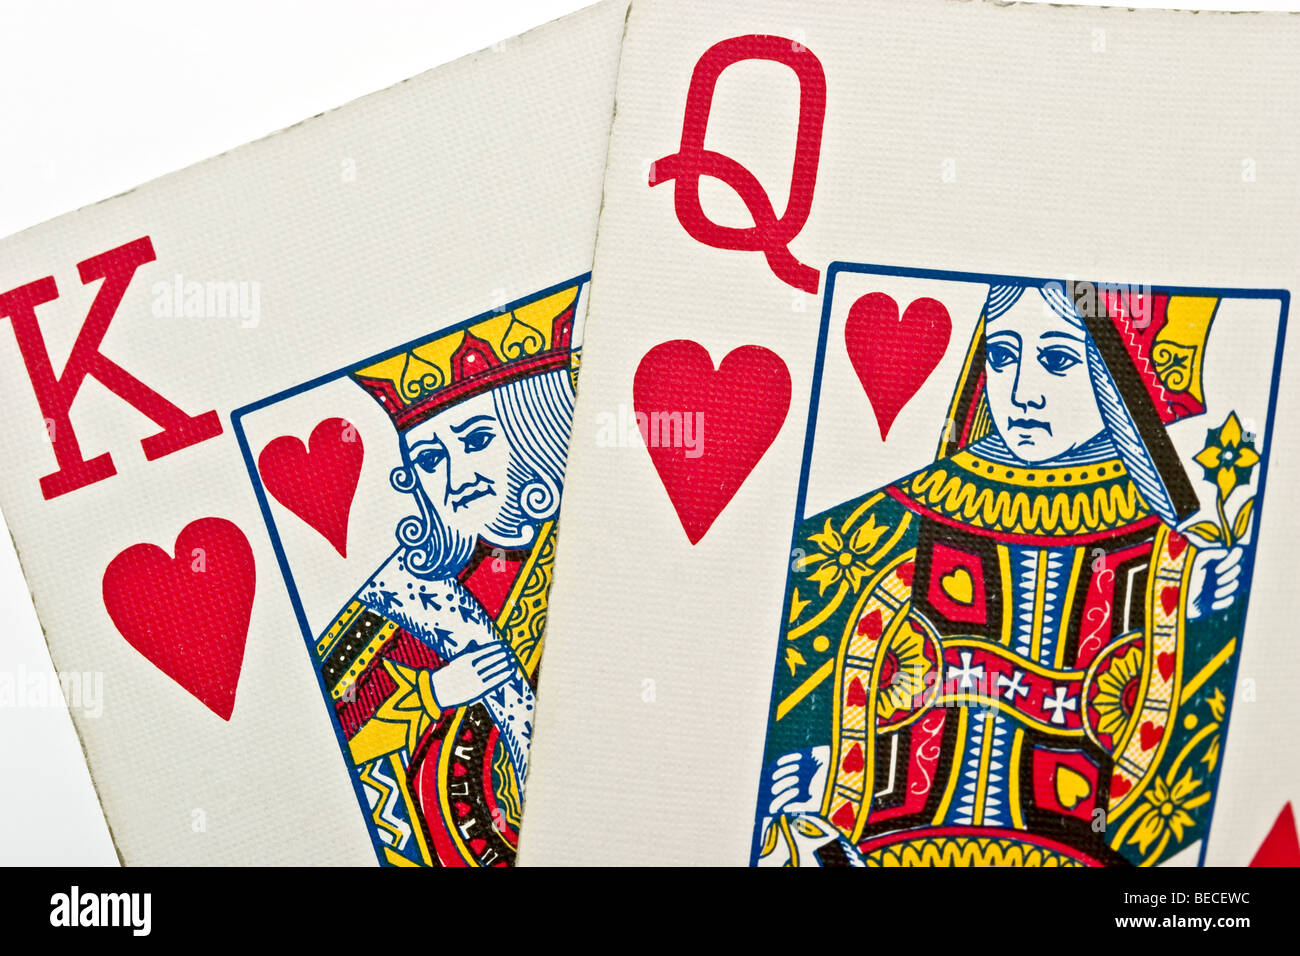 King, queen, jack, antique playing cards. These are the three clubs -  Stock Image - Everypixel